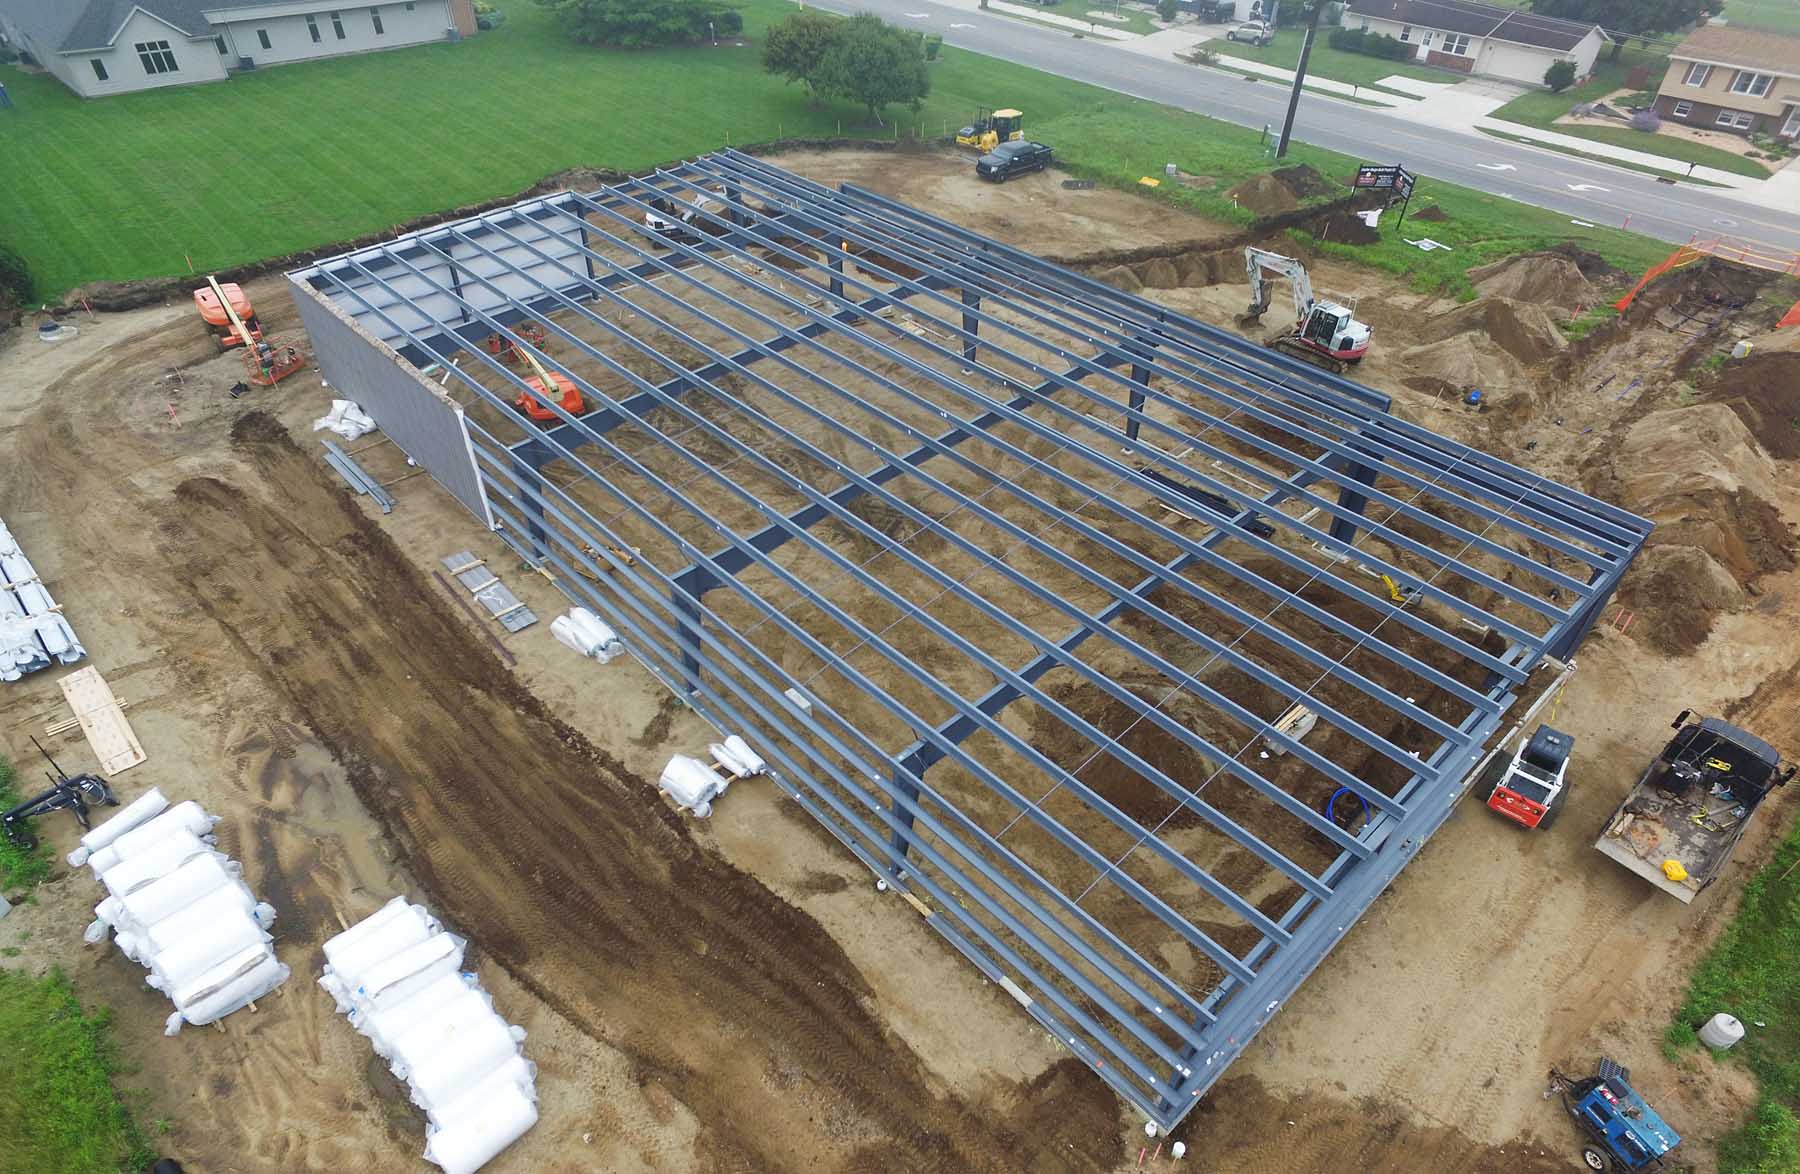 Schrock Commercial construction does general contracting and design build services at a job site in Goshen, Indiana